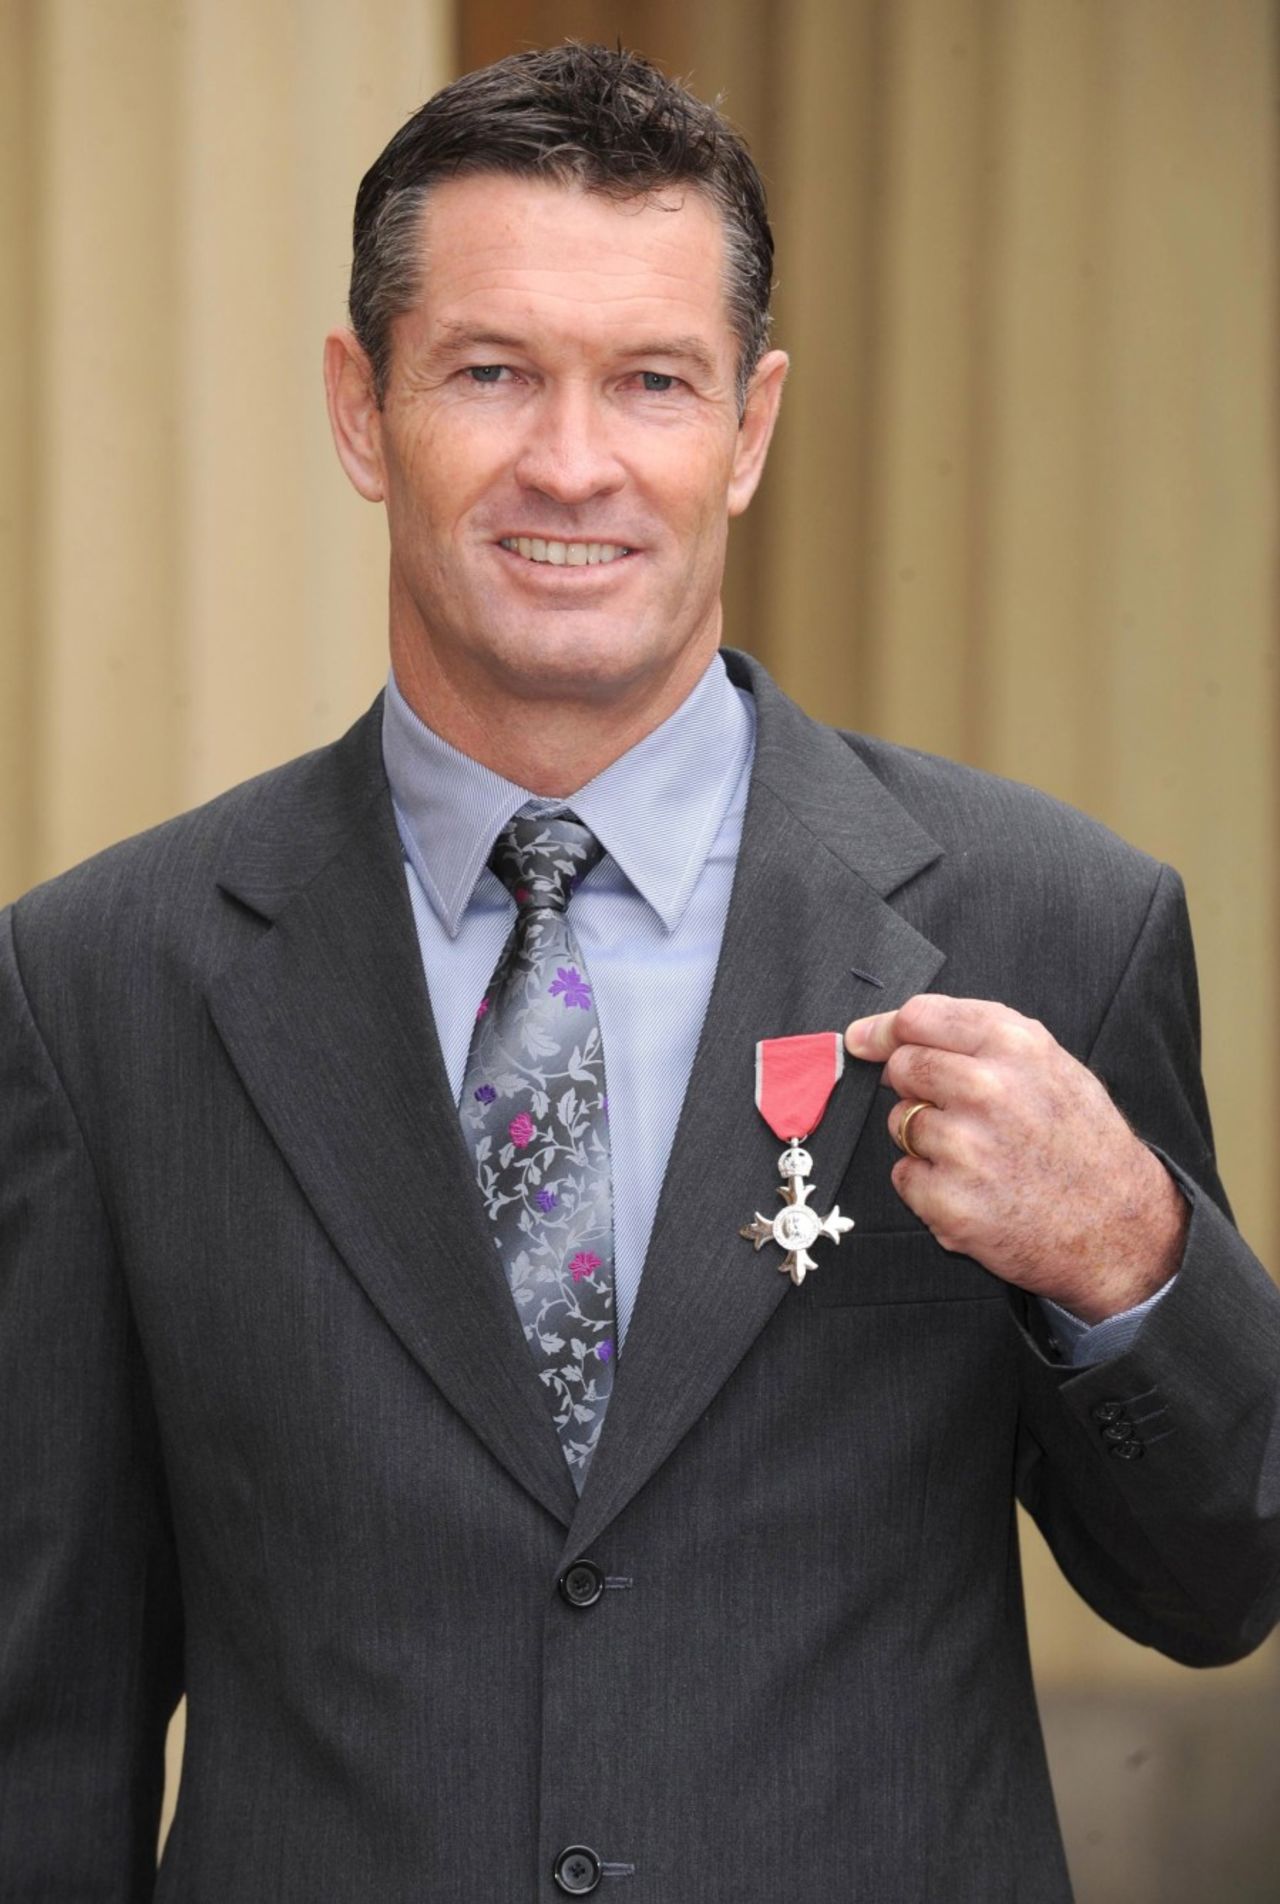 Graeme Hick with his MBE, London, October 20, 2009